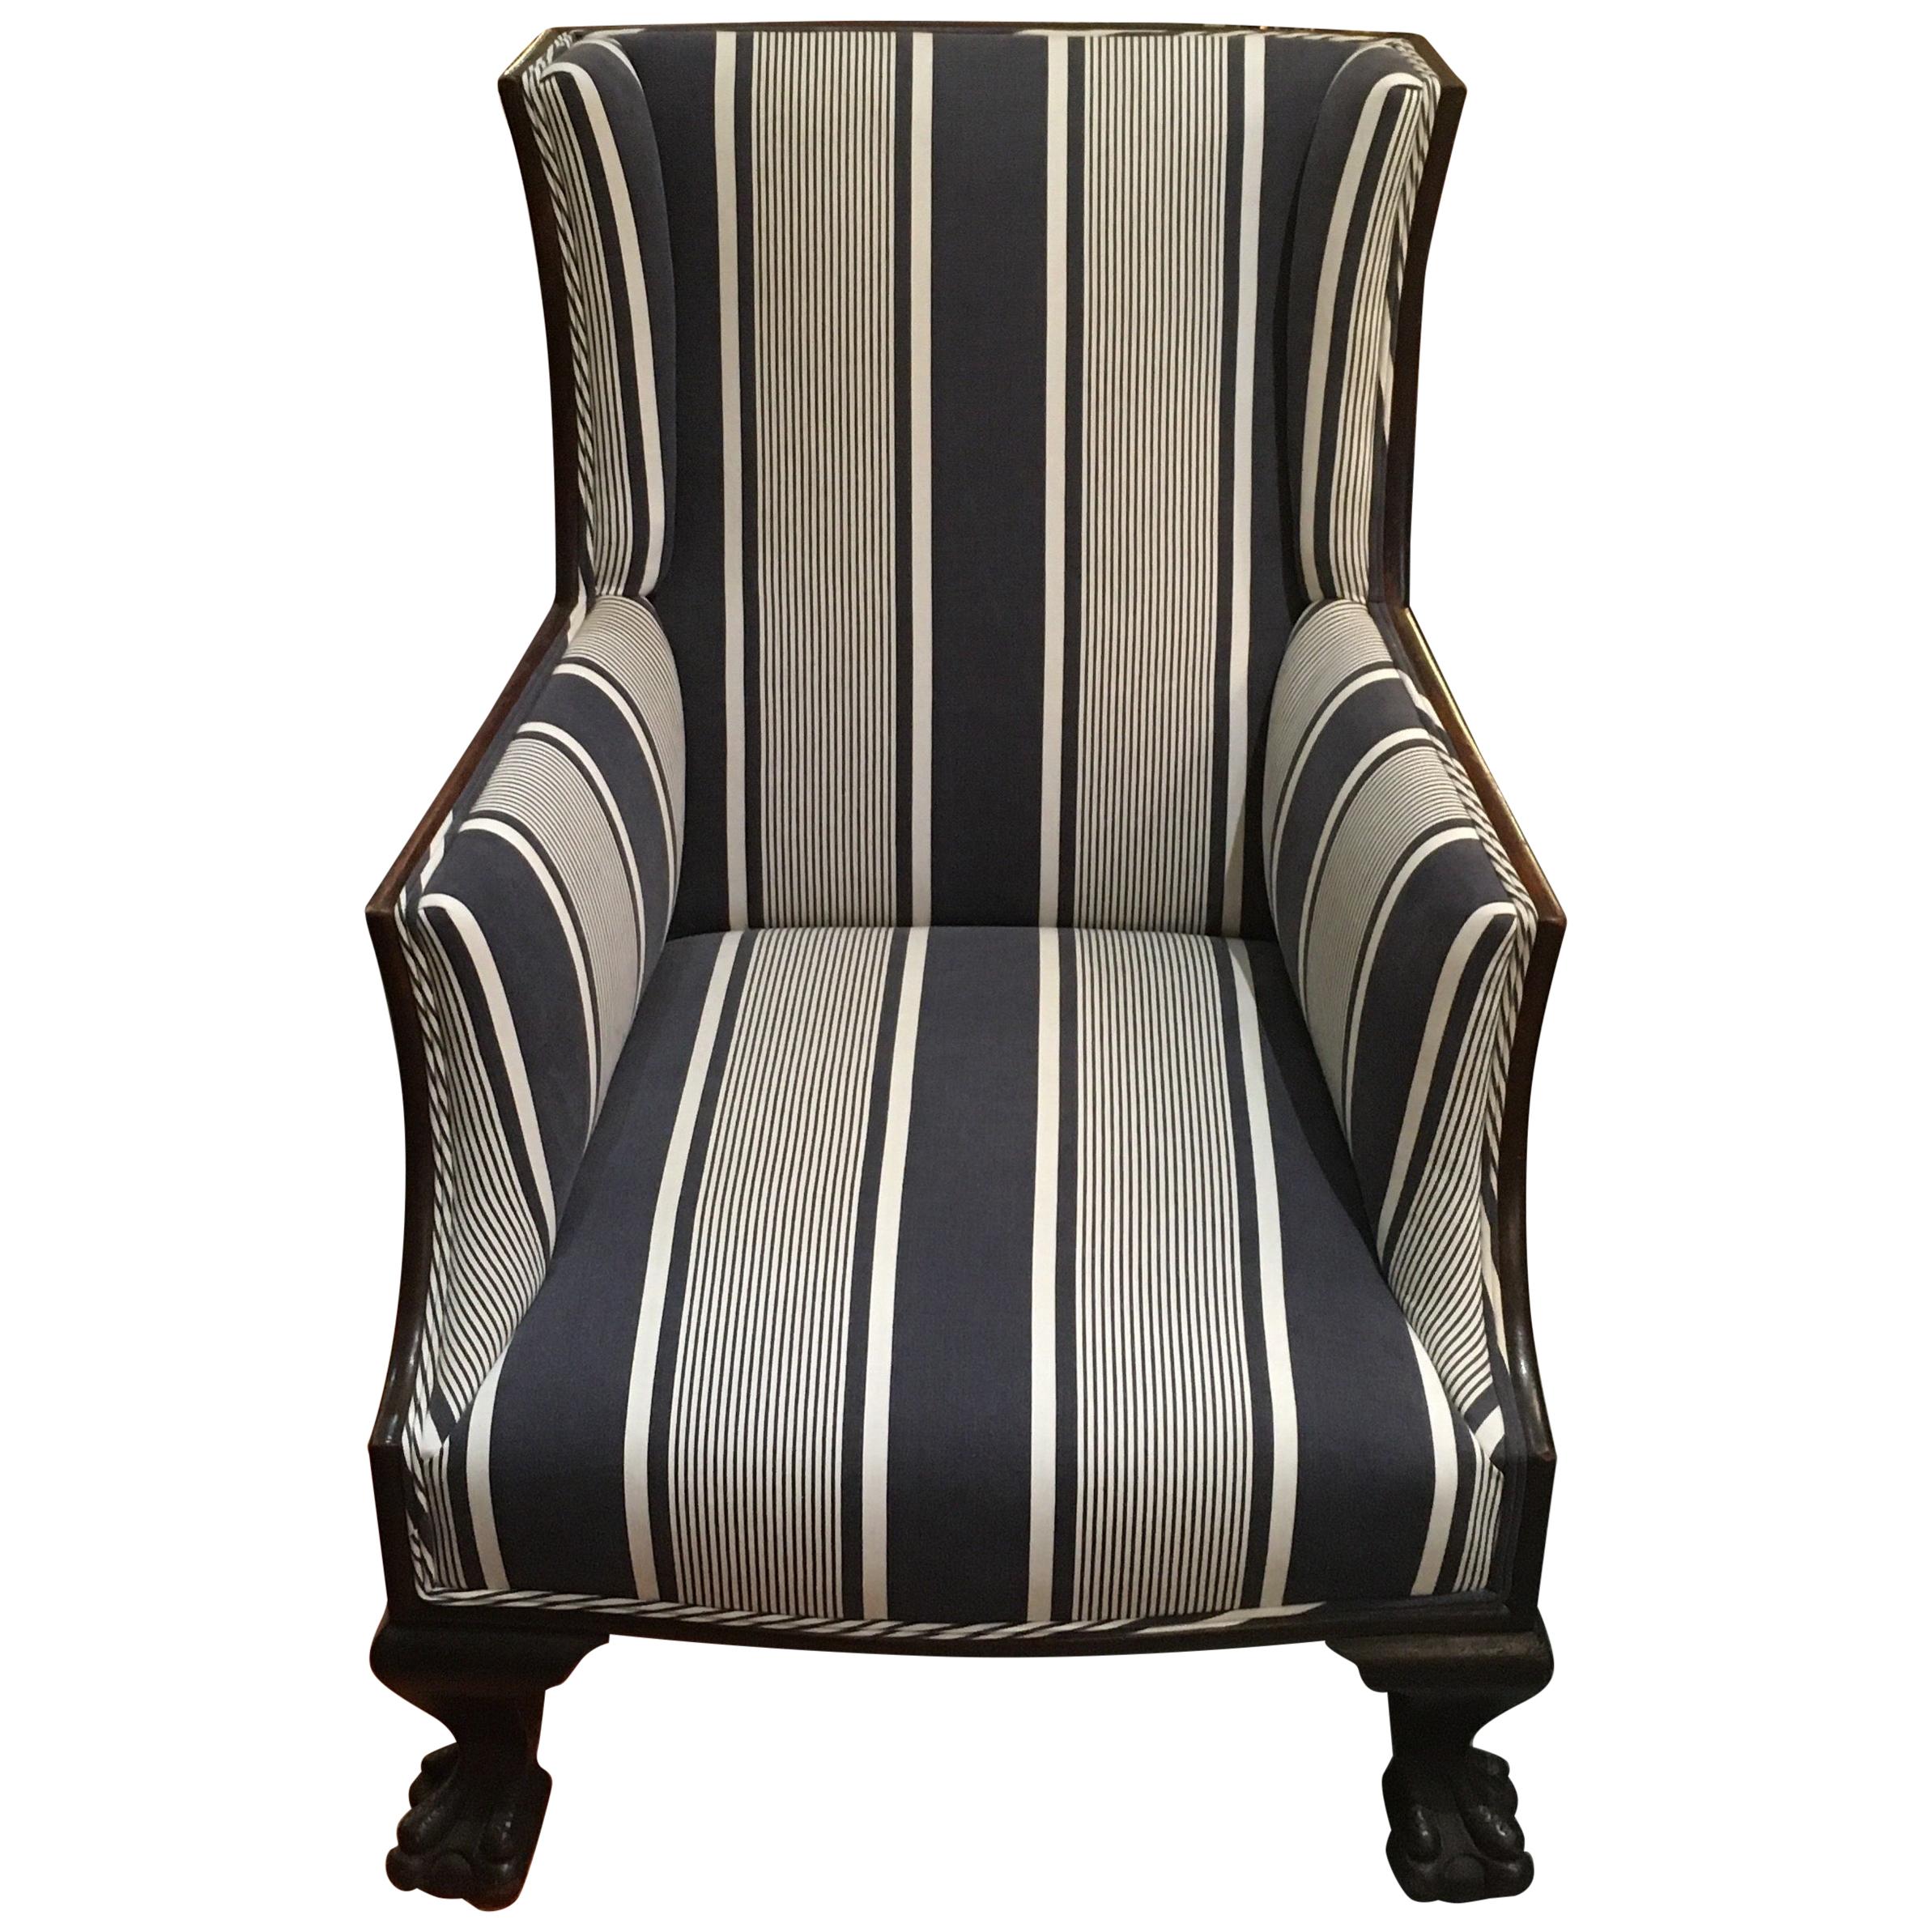 Antique Lion Paw Armchair in French Stripe Fabric